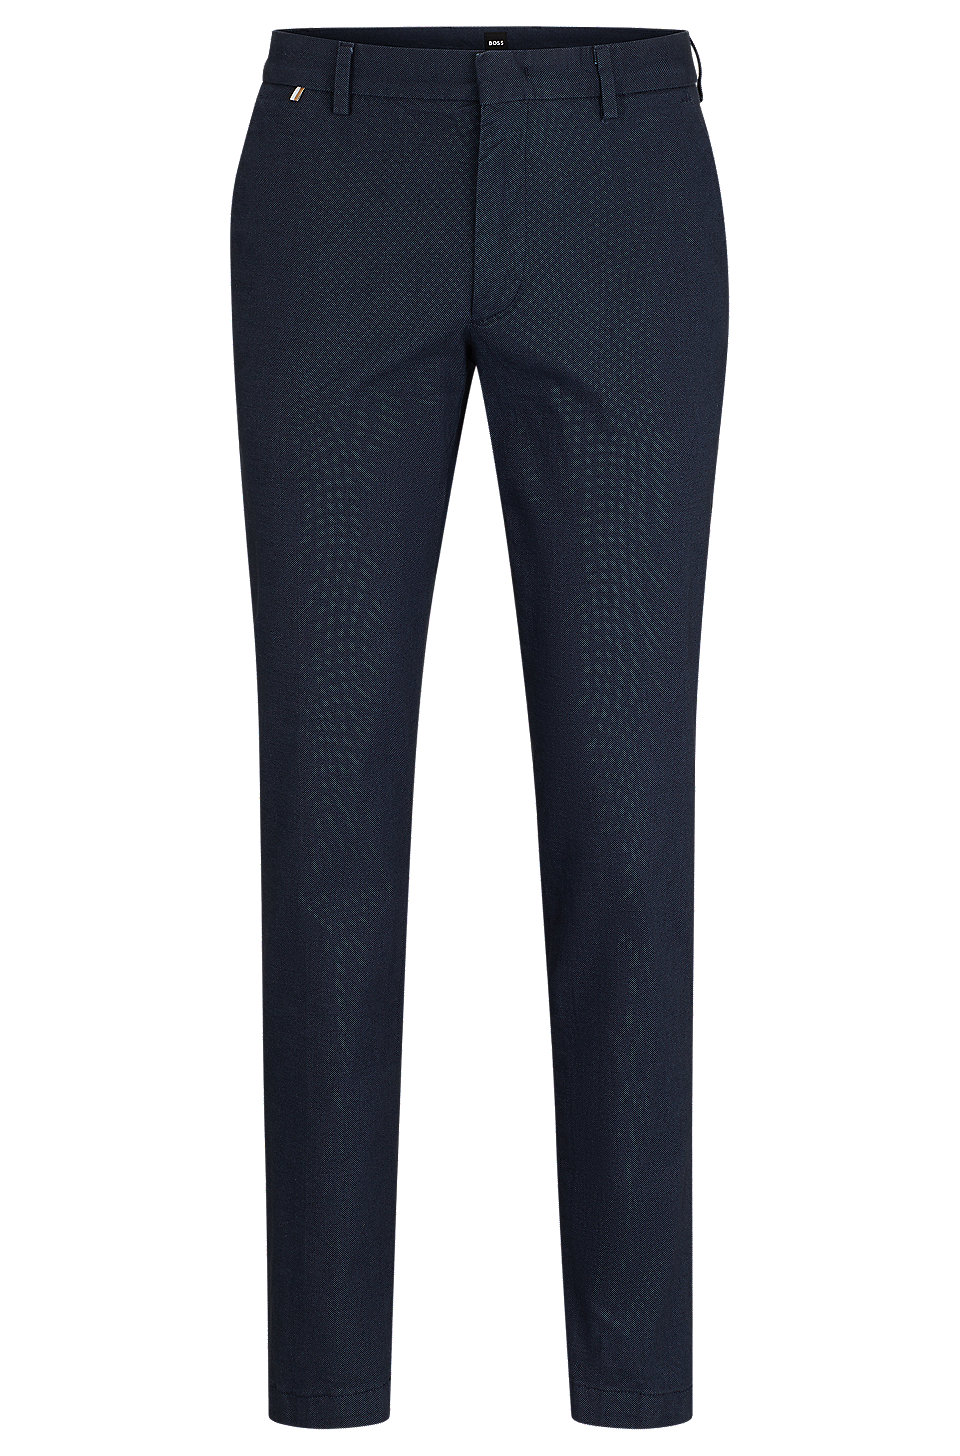 BOSS - Slim-fit chinos in two-tone stretch cotton